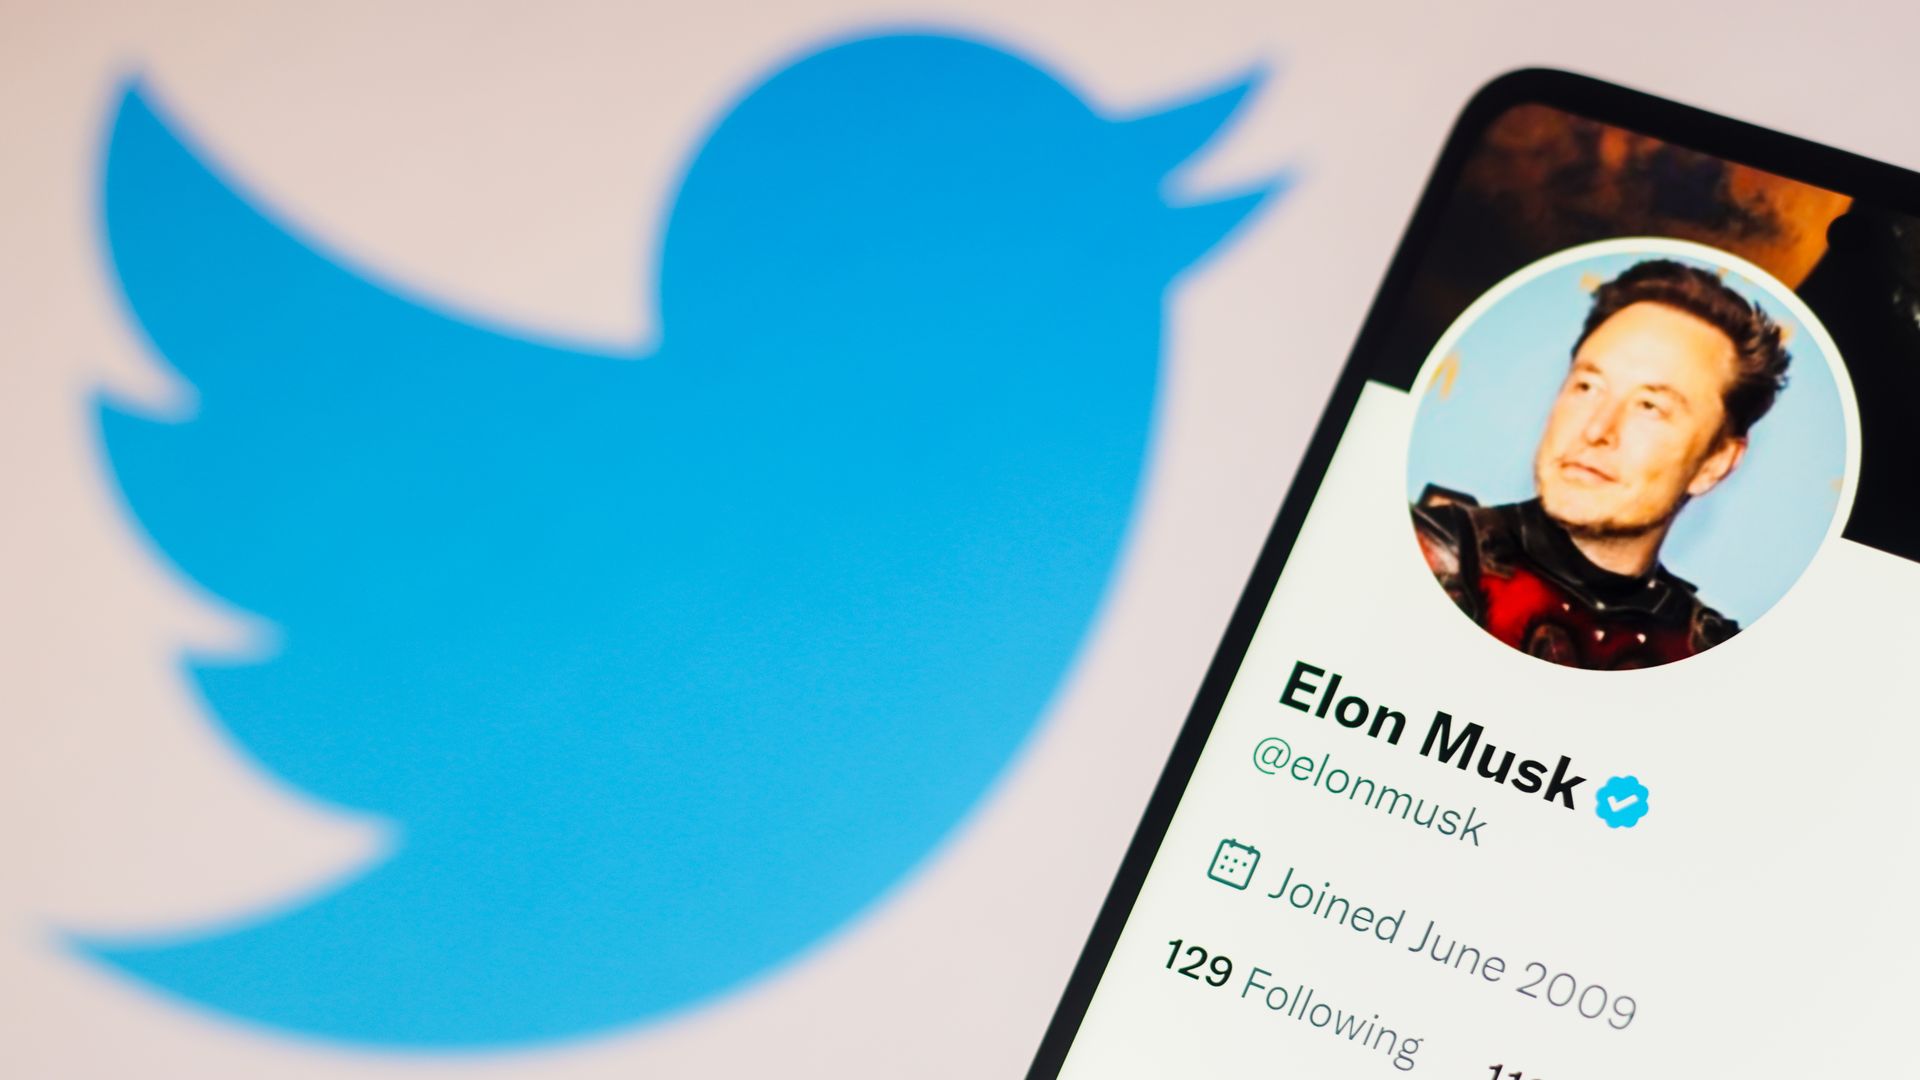 the Elon Musk Twitter account seen displayed on a smartphone and Twitter logo in the background. 